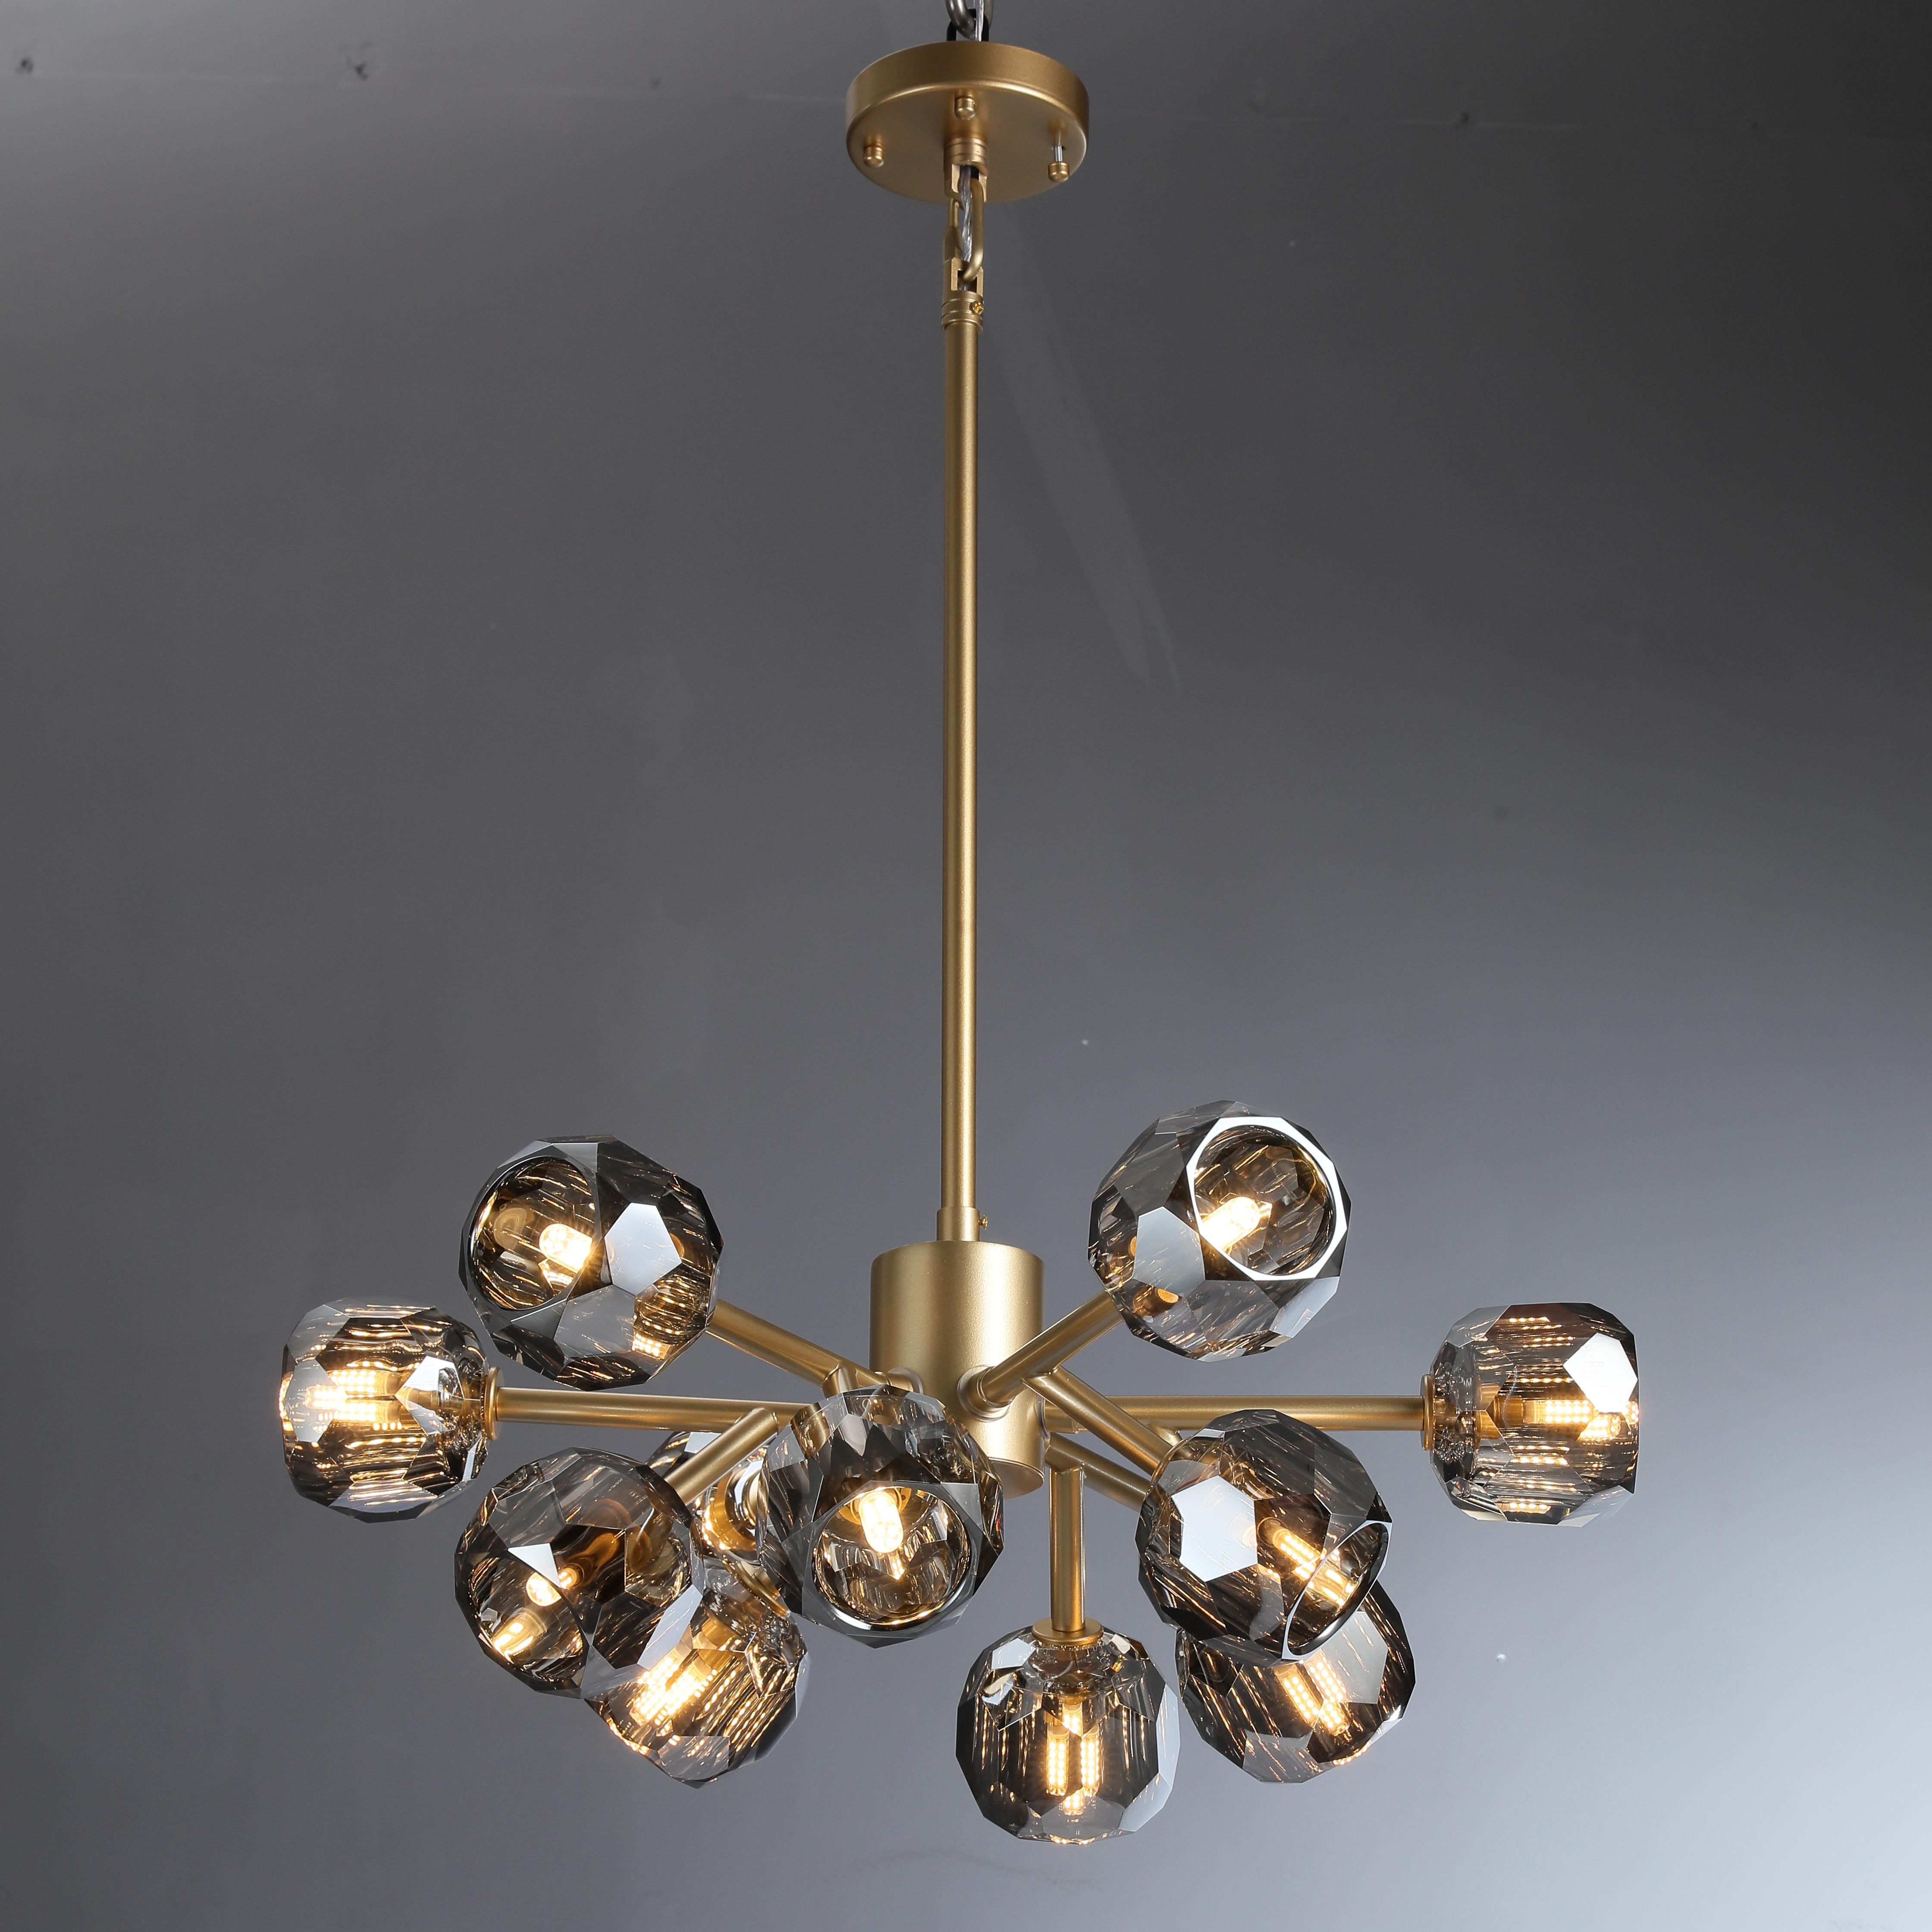 Floris Modern Crystal Ball Round Chandelier 24" For Living Room chandelier Kevin Studio Inc Lacquered Burnished Brass Smoky 